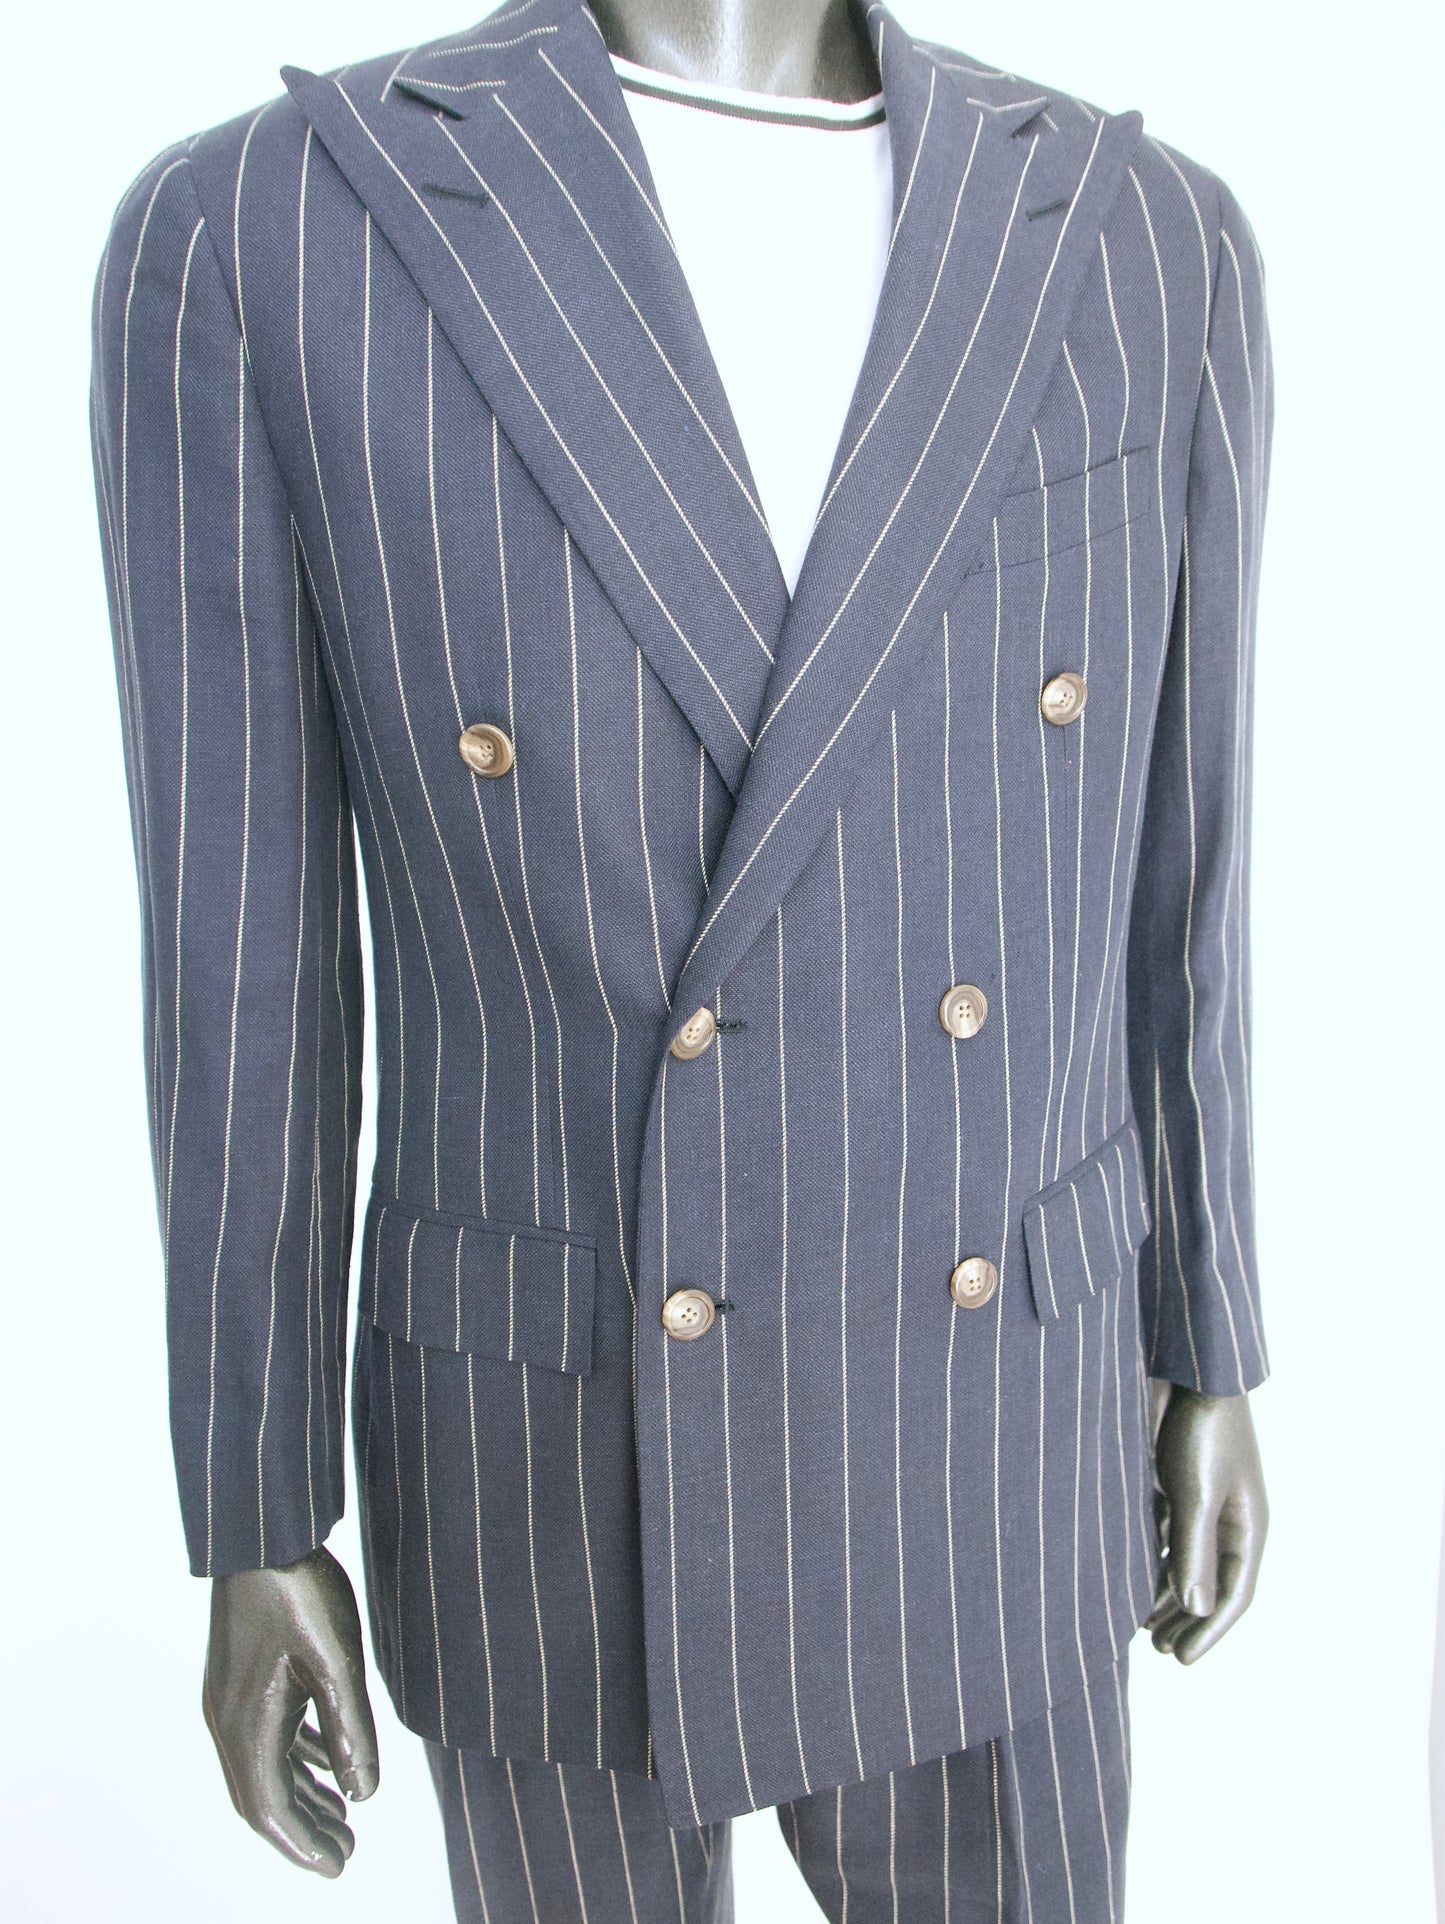 Polo Ralph Lauren Double-Breasted Pinstripe Virgin Wool Suit, Size 39R